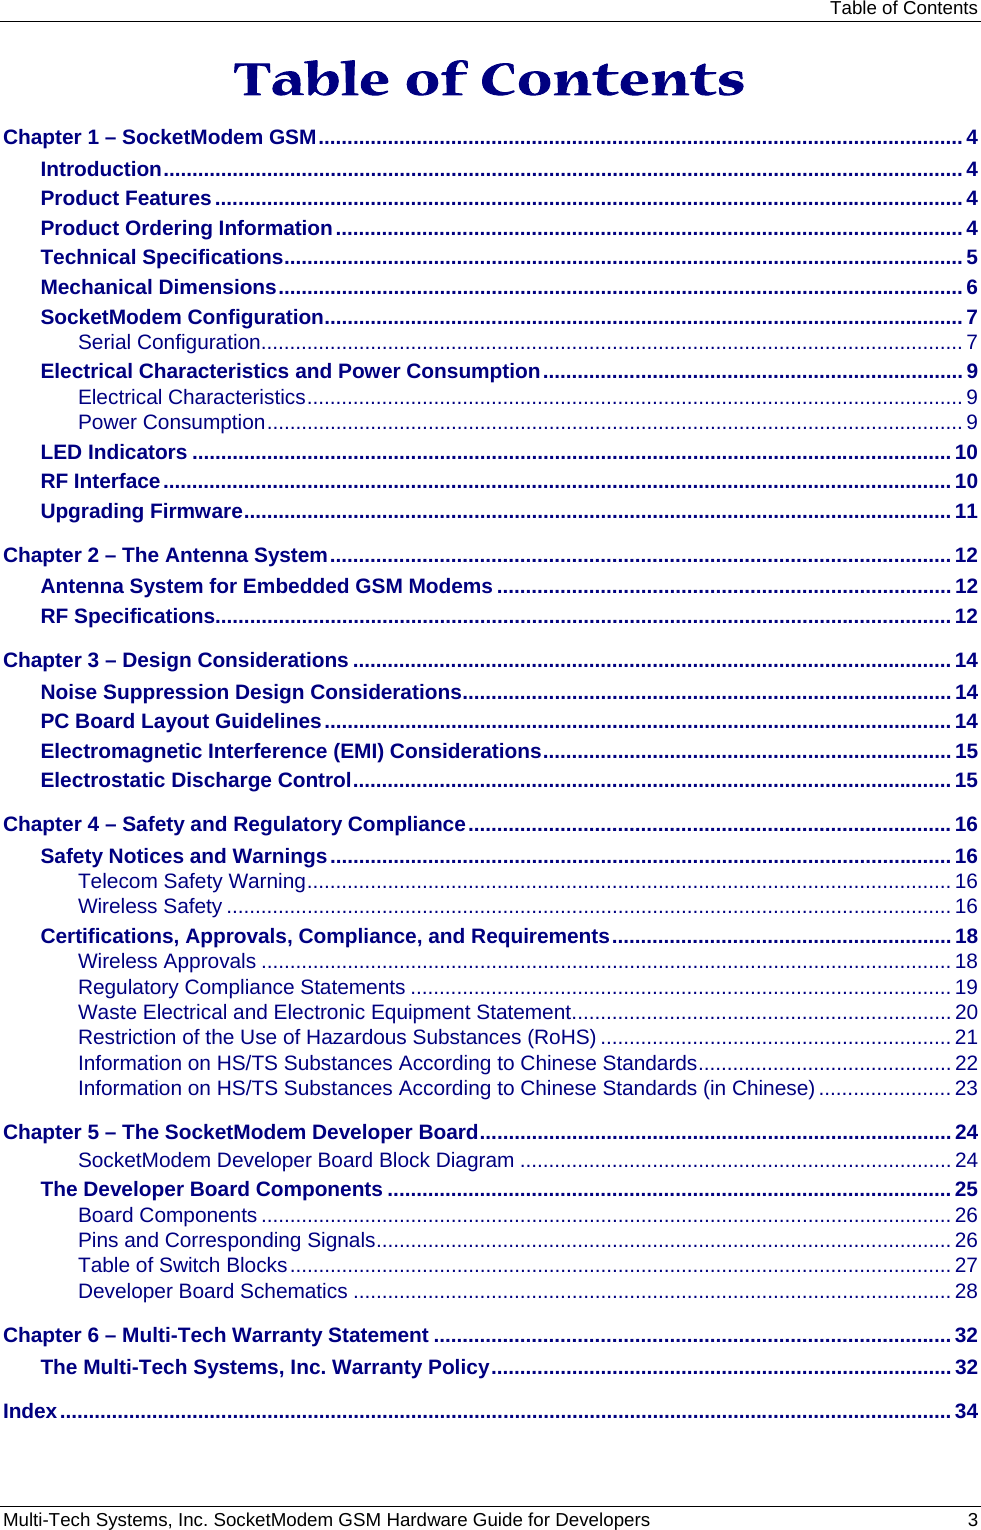 Table of Contents Multi-Tech Systems, Inc. SocketModem GSM Hardware Guide for Developers   3  Table of Contents Chapter 1 – SocketModem GSM................................................................................................................ 4 Introduction........................................................................................................................................... 4 Product Features.................................................................................................................................. 4 Product Ordering Information............................................................................................................. 4 Technical Specifications...................................................................................................................... 5 Mechanical Dimensions....................................................................................................................... 6 SocketModem Configuration............................................................................................................... 7 Serial Configuration.......................................................................................................................... 7 Electrical Characteristics and Power Consumption......................................................................... 9 Electrical Characteristics.................................................................................................................. 9 Power Consumption......................................................................................................................... 9 LED Indicators .................................................................................................................................... 10 RF Interface......................................................................................................................................... 10 Upgrading Firmware........................................................................................................................... 11 Chapter 2 – The Antenna System............................................................................................................ 12 Antenna System for Embedded GSM Modems ............................................................................... 12 RF Specifications................................................................................................................................ 12 Chapter 3 – Design Considerations ........................................................................................................ 14 Noise Suppression Design Considerations..................................................................................... 14 PC Board Layout Guidelines............................................................................................................. 14 Electromagnetic Interference (EMI) Considerations....................................................................... 15 Electrostatic Discharge Control........................................................................................................ 15 Chapter 4 – Safety and Regulatory Compliance....................................................................................16 Safety Notices and Warnings............................................................................................................ 16 Telecom Safety Warning................................................................................................................ 16 Wireless Safety .............................................................................................................................. 16 Certifications, Approvals, Compliance, and Requirements........................................................... 18 Wireless Approvals ........................................................................................................................ 18 Regulatory Compliance Statements .............................................................................................. 19 Waste Electrical and Electronic Equipment Statement.................................................................. 20 Restriction of the Use of Hazardous Substances (RoHS) ............................................................. 21 Information on HS/TS Substances According to Chinese Standards............................................ 22 Information on HS/TS Substances According to Chinese Standards (in Chinese) ....................... 23 Chapter 5 – The SocketModem Developer Board.................................................................................. 24 SocketModem Developer Board Block Diagram ........................................................................... 24 The Developer Board Components ..................................................................................................25 Board Components ........................................................................................................................ 26 Pins and Corresponding Signals.................................................................................................... 26 Table of Switch Blocks................................................................................................................... 27 Developer Board Schematics ........................................................................................................ 28 Chapter 6 – Multi-Tech Warranty Statement .......................................................................................... 32 The Multi-Tech Systems, Inc. Warranty Policy................................................................................ 32 Index........................................................................................................................................................... 34 